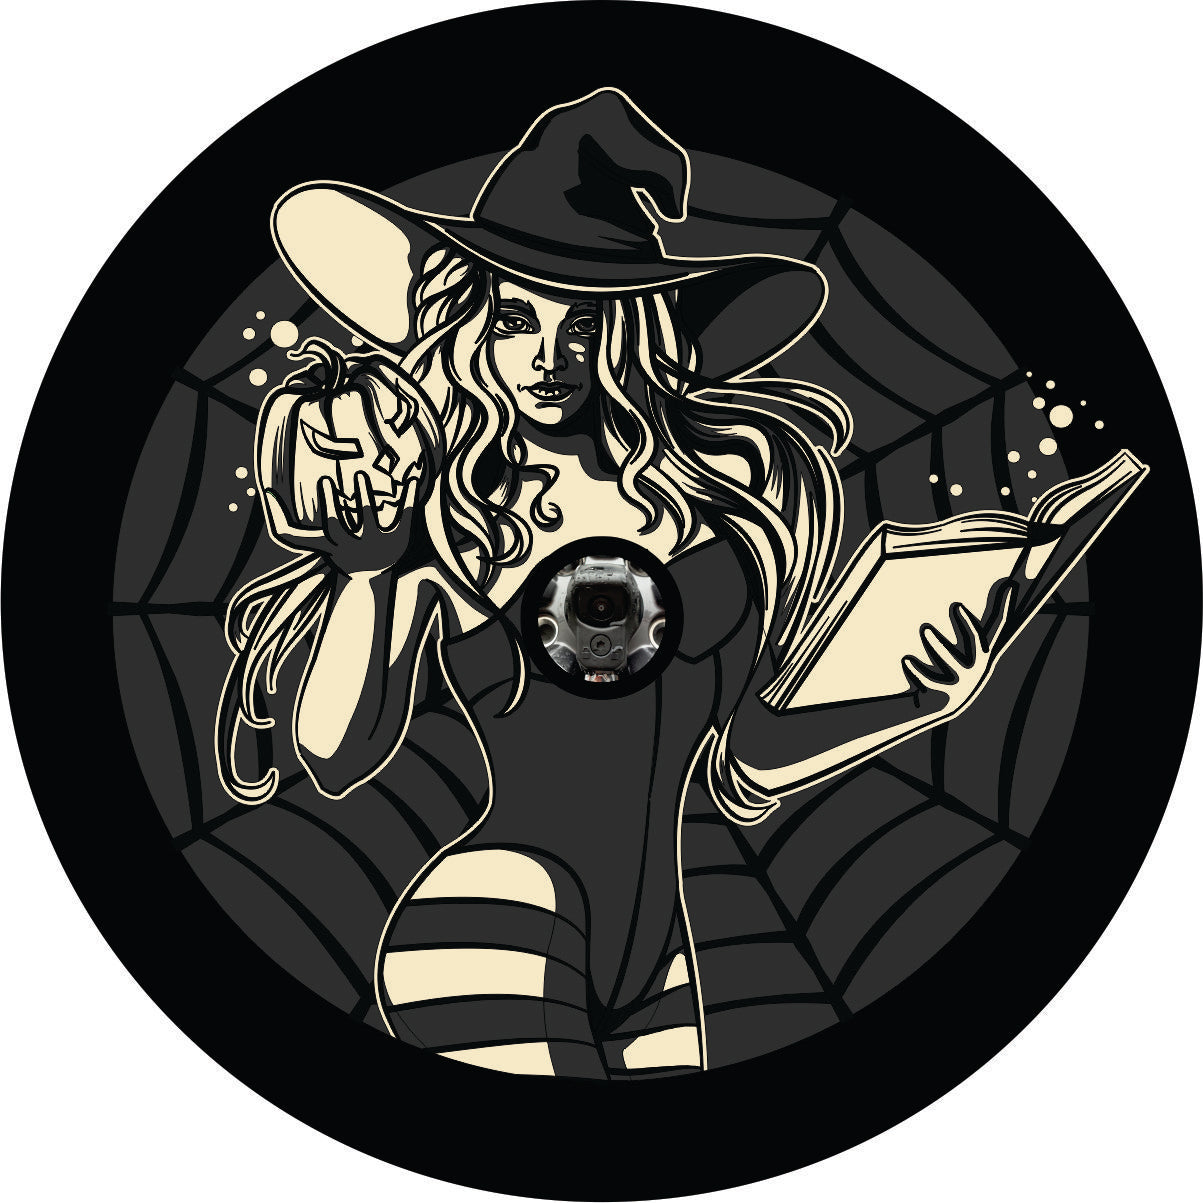 A spooky sexy graphic image of a witch in a corset and striped stockings holding a pumpkin and a book with a spider web in the back ground spare tire cover design with back up camera for Jeep, RV, campers, Bronco, and more.